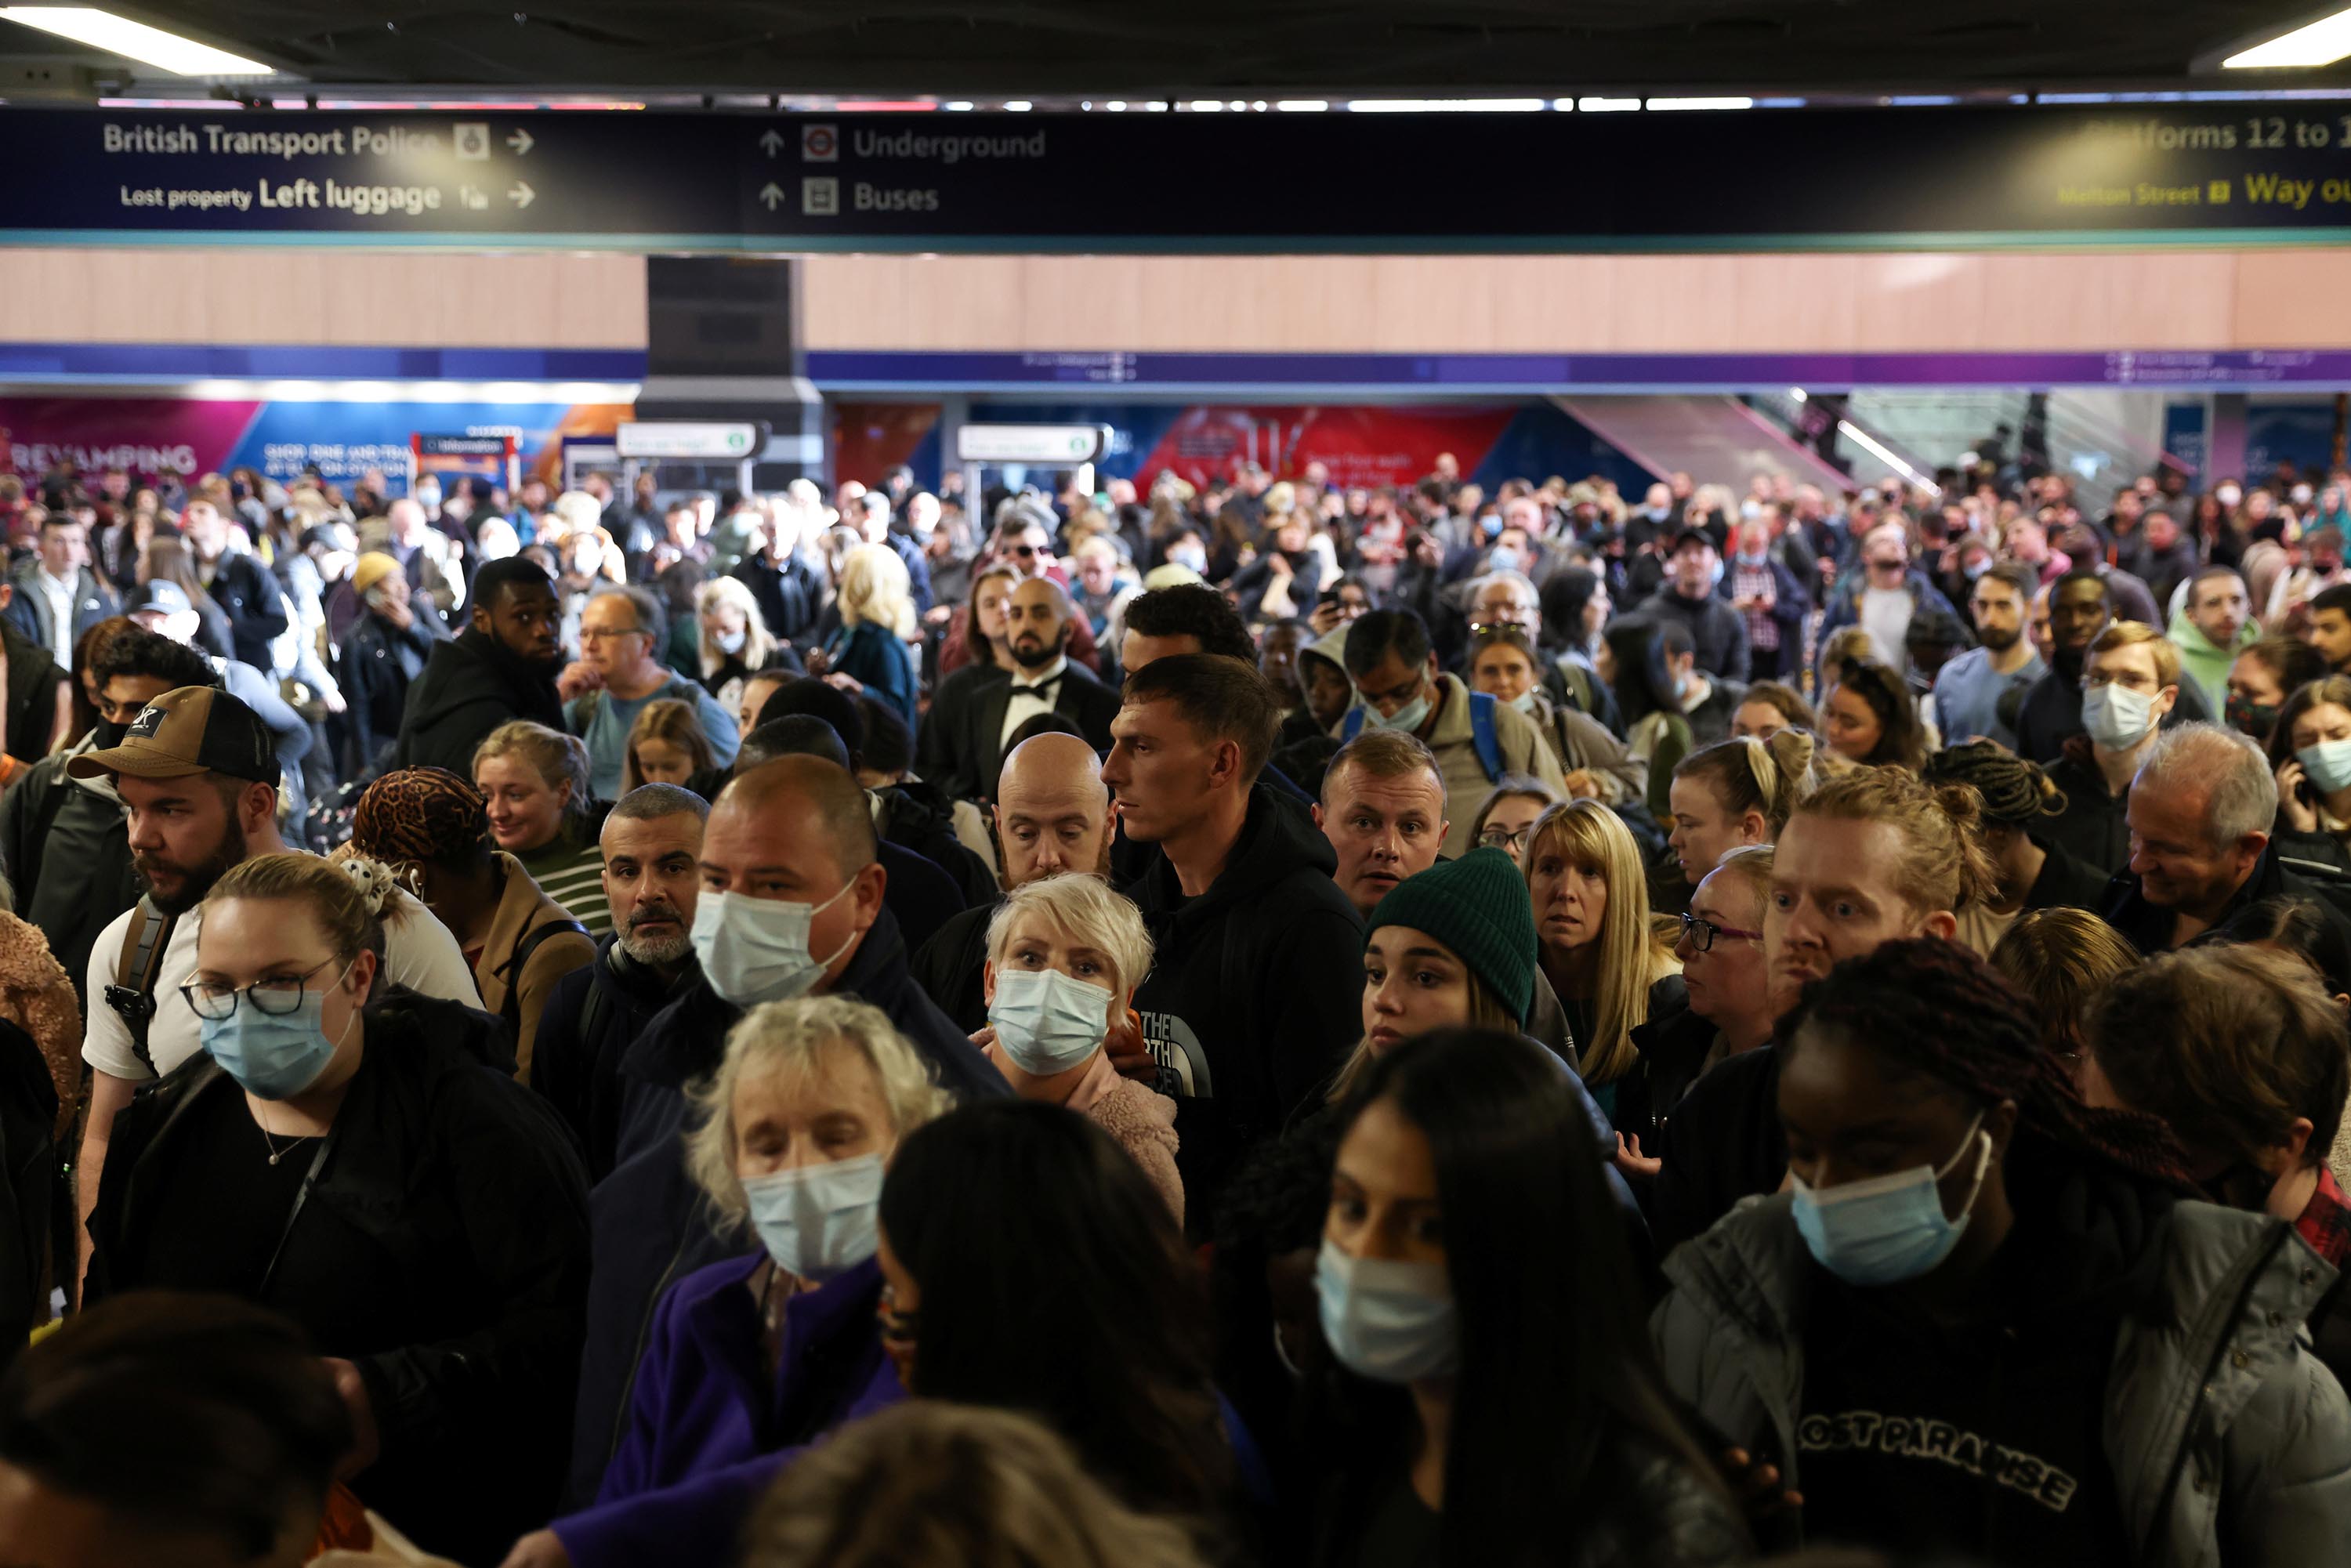 Passengers wait in Euston Station after trains were cancelled ahead COP26 on Sunday, October 31.